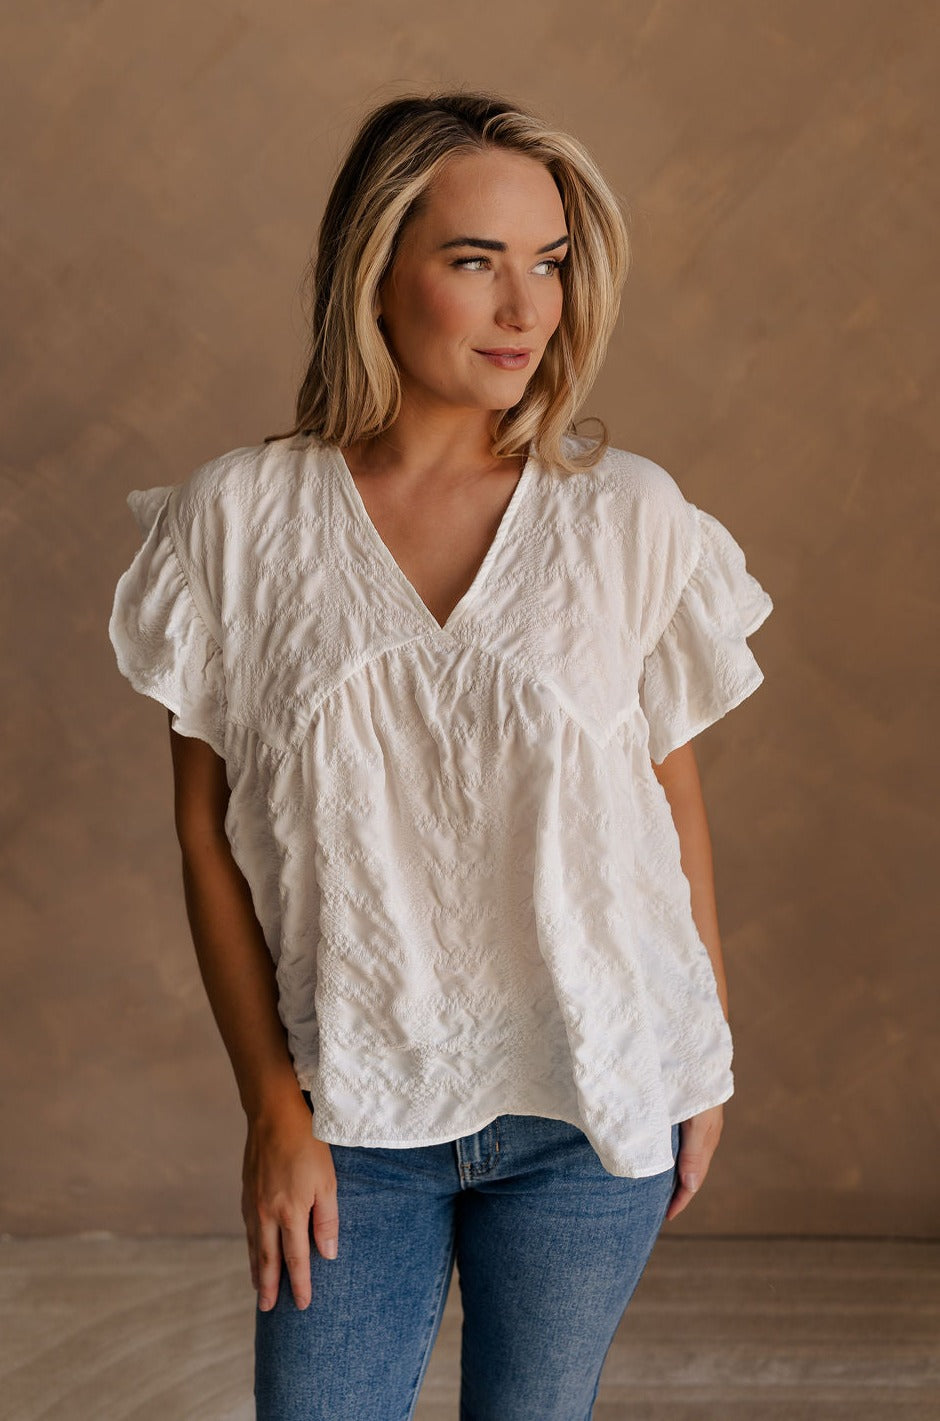 Upper body front view of female model wearing the Vivienne White Textured Top that has white textured fabric, short ruffled sleeves, and v neckline. worn with jeans.